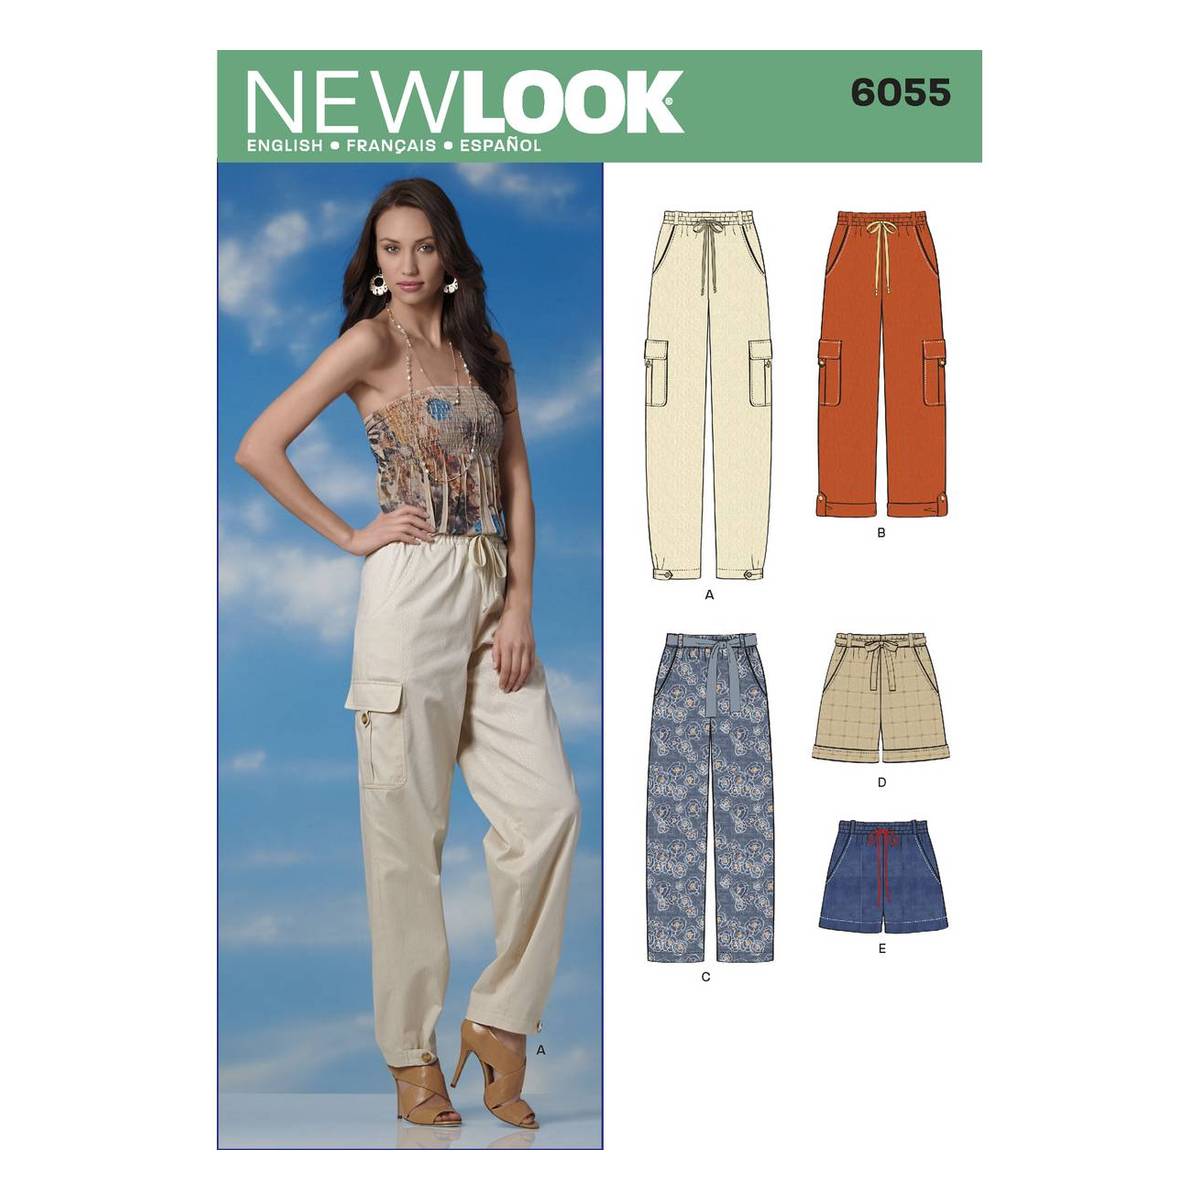 New Look Women's Trousers and Shorts Sewing Pattern 6055 | Hobbycraft